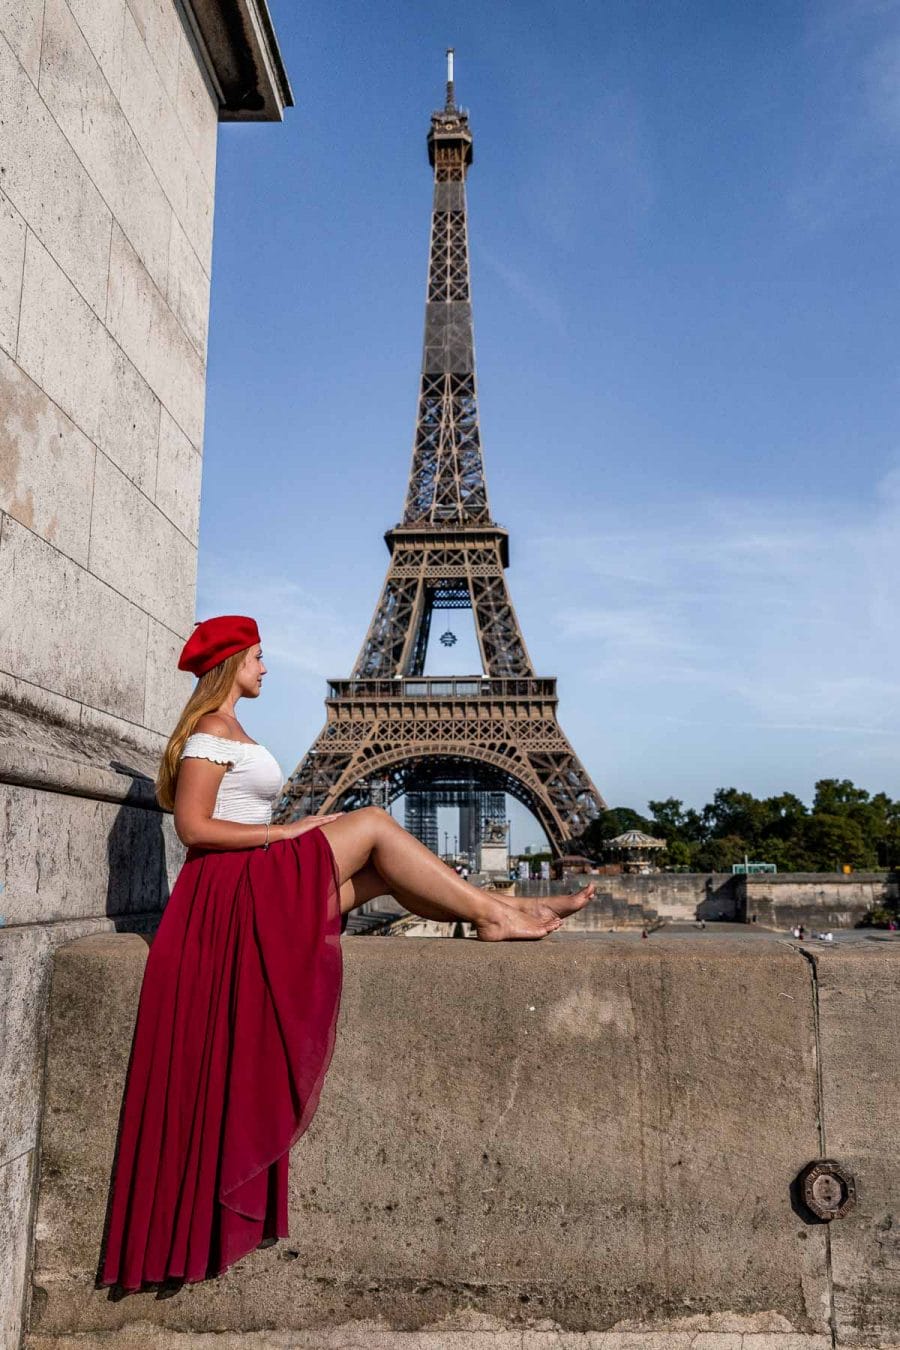 Girl in a red skirt and beret sitting on Pont d'Léna, looking at the Eiffel Tower